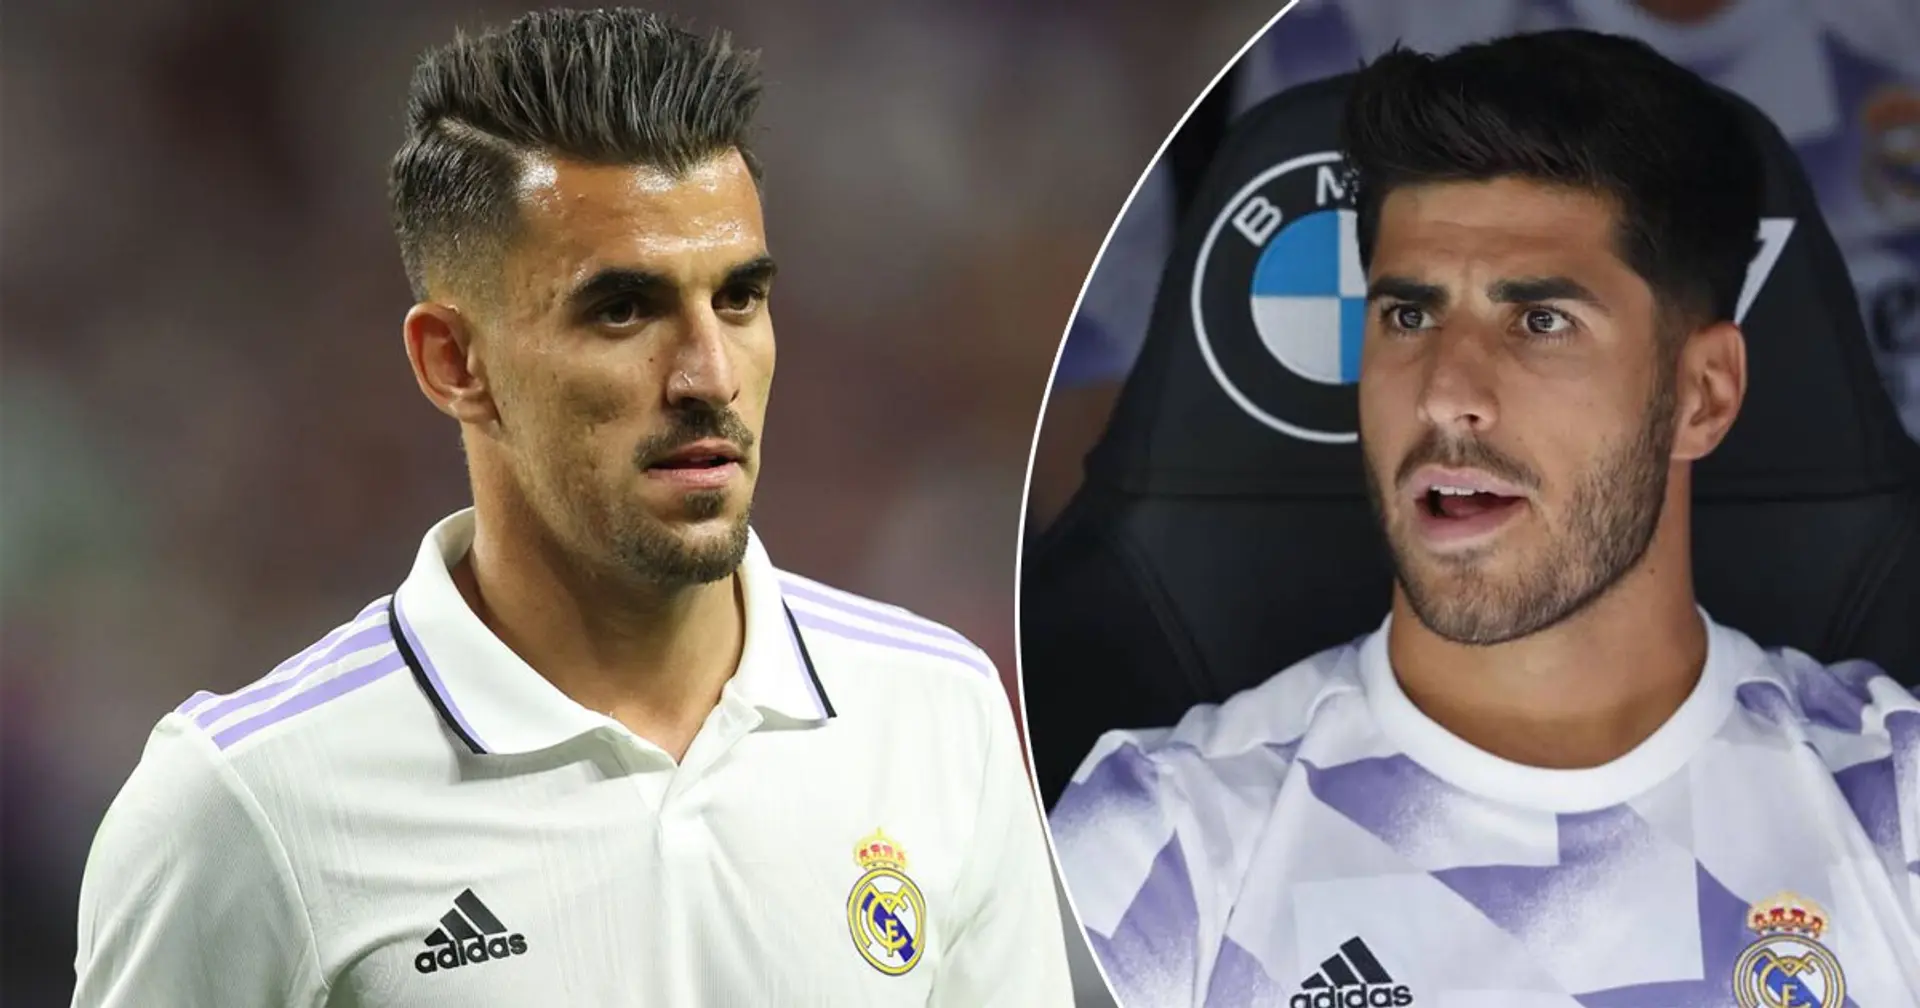 Still no extension offers for Ceballos and Asensio (reliability: 5 stars)